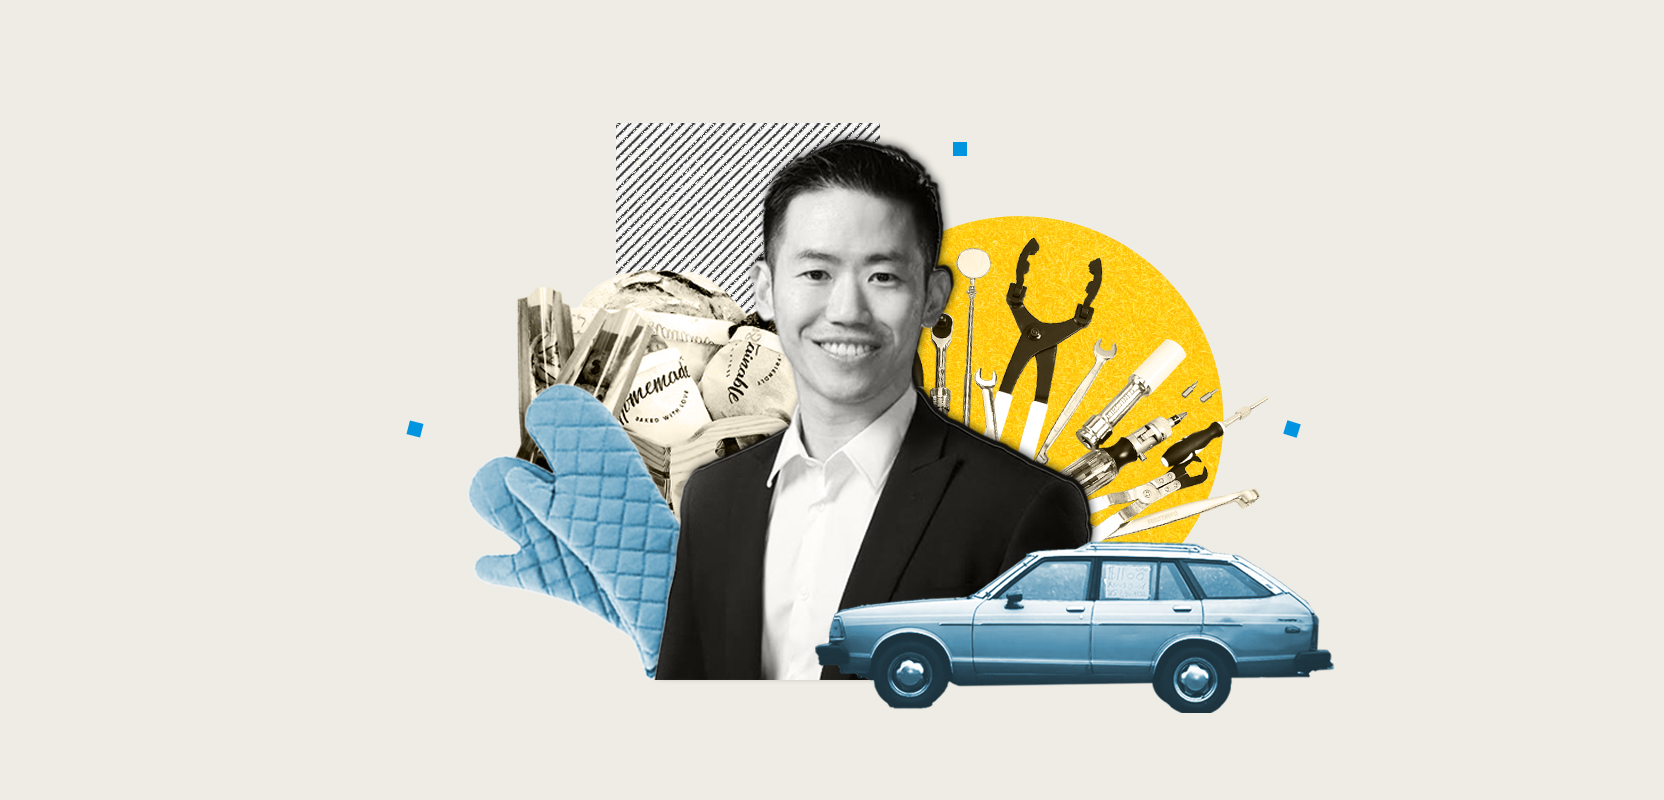 Lawrence Ng surrounded by objects from his past, including many tools he used at his various side hustles.